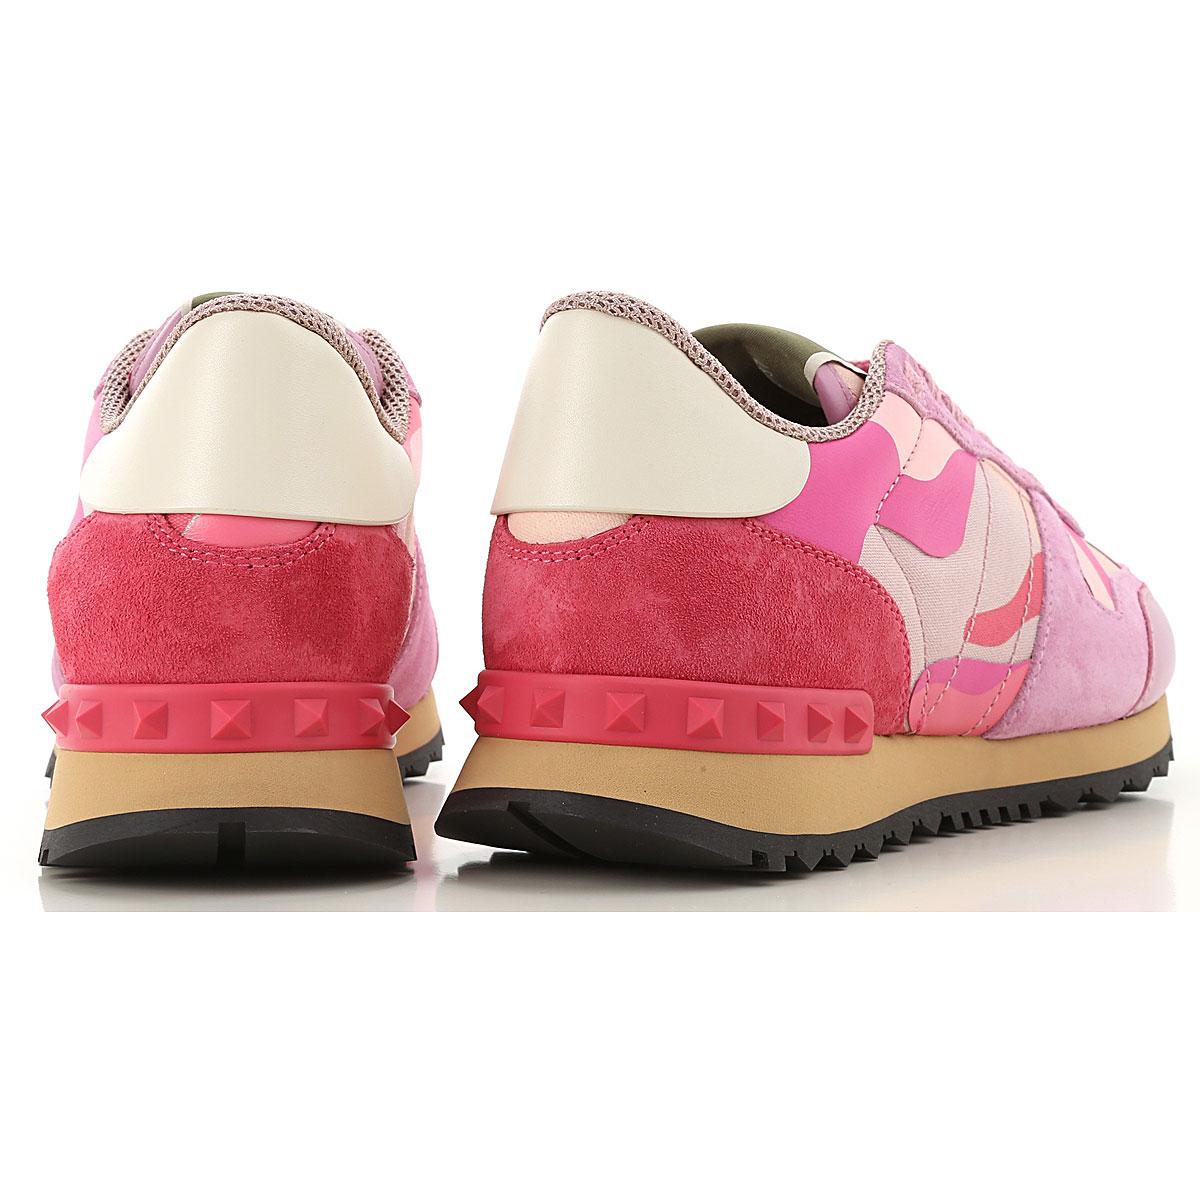 Valentino Sneakers For Women On Sale in Hot Pink (Pink) - Lyst